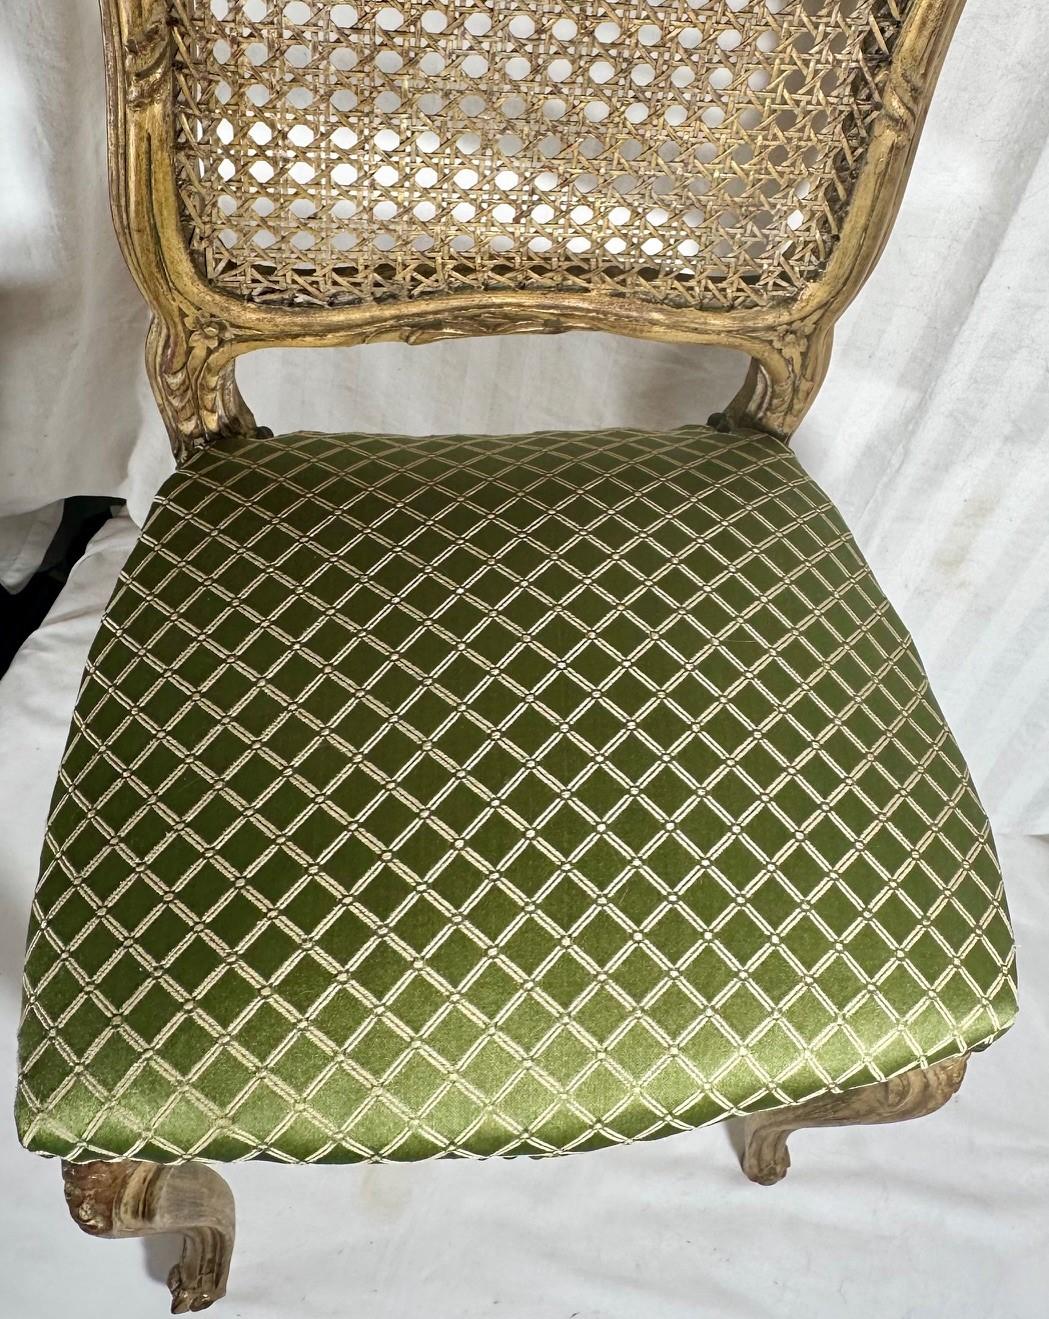 Rococo Style Giltwood Cane Chair with Upholstered Seat, Side Chair.y In Good Condition For Sale In Vero Beach, FL